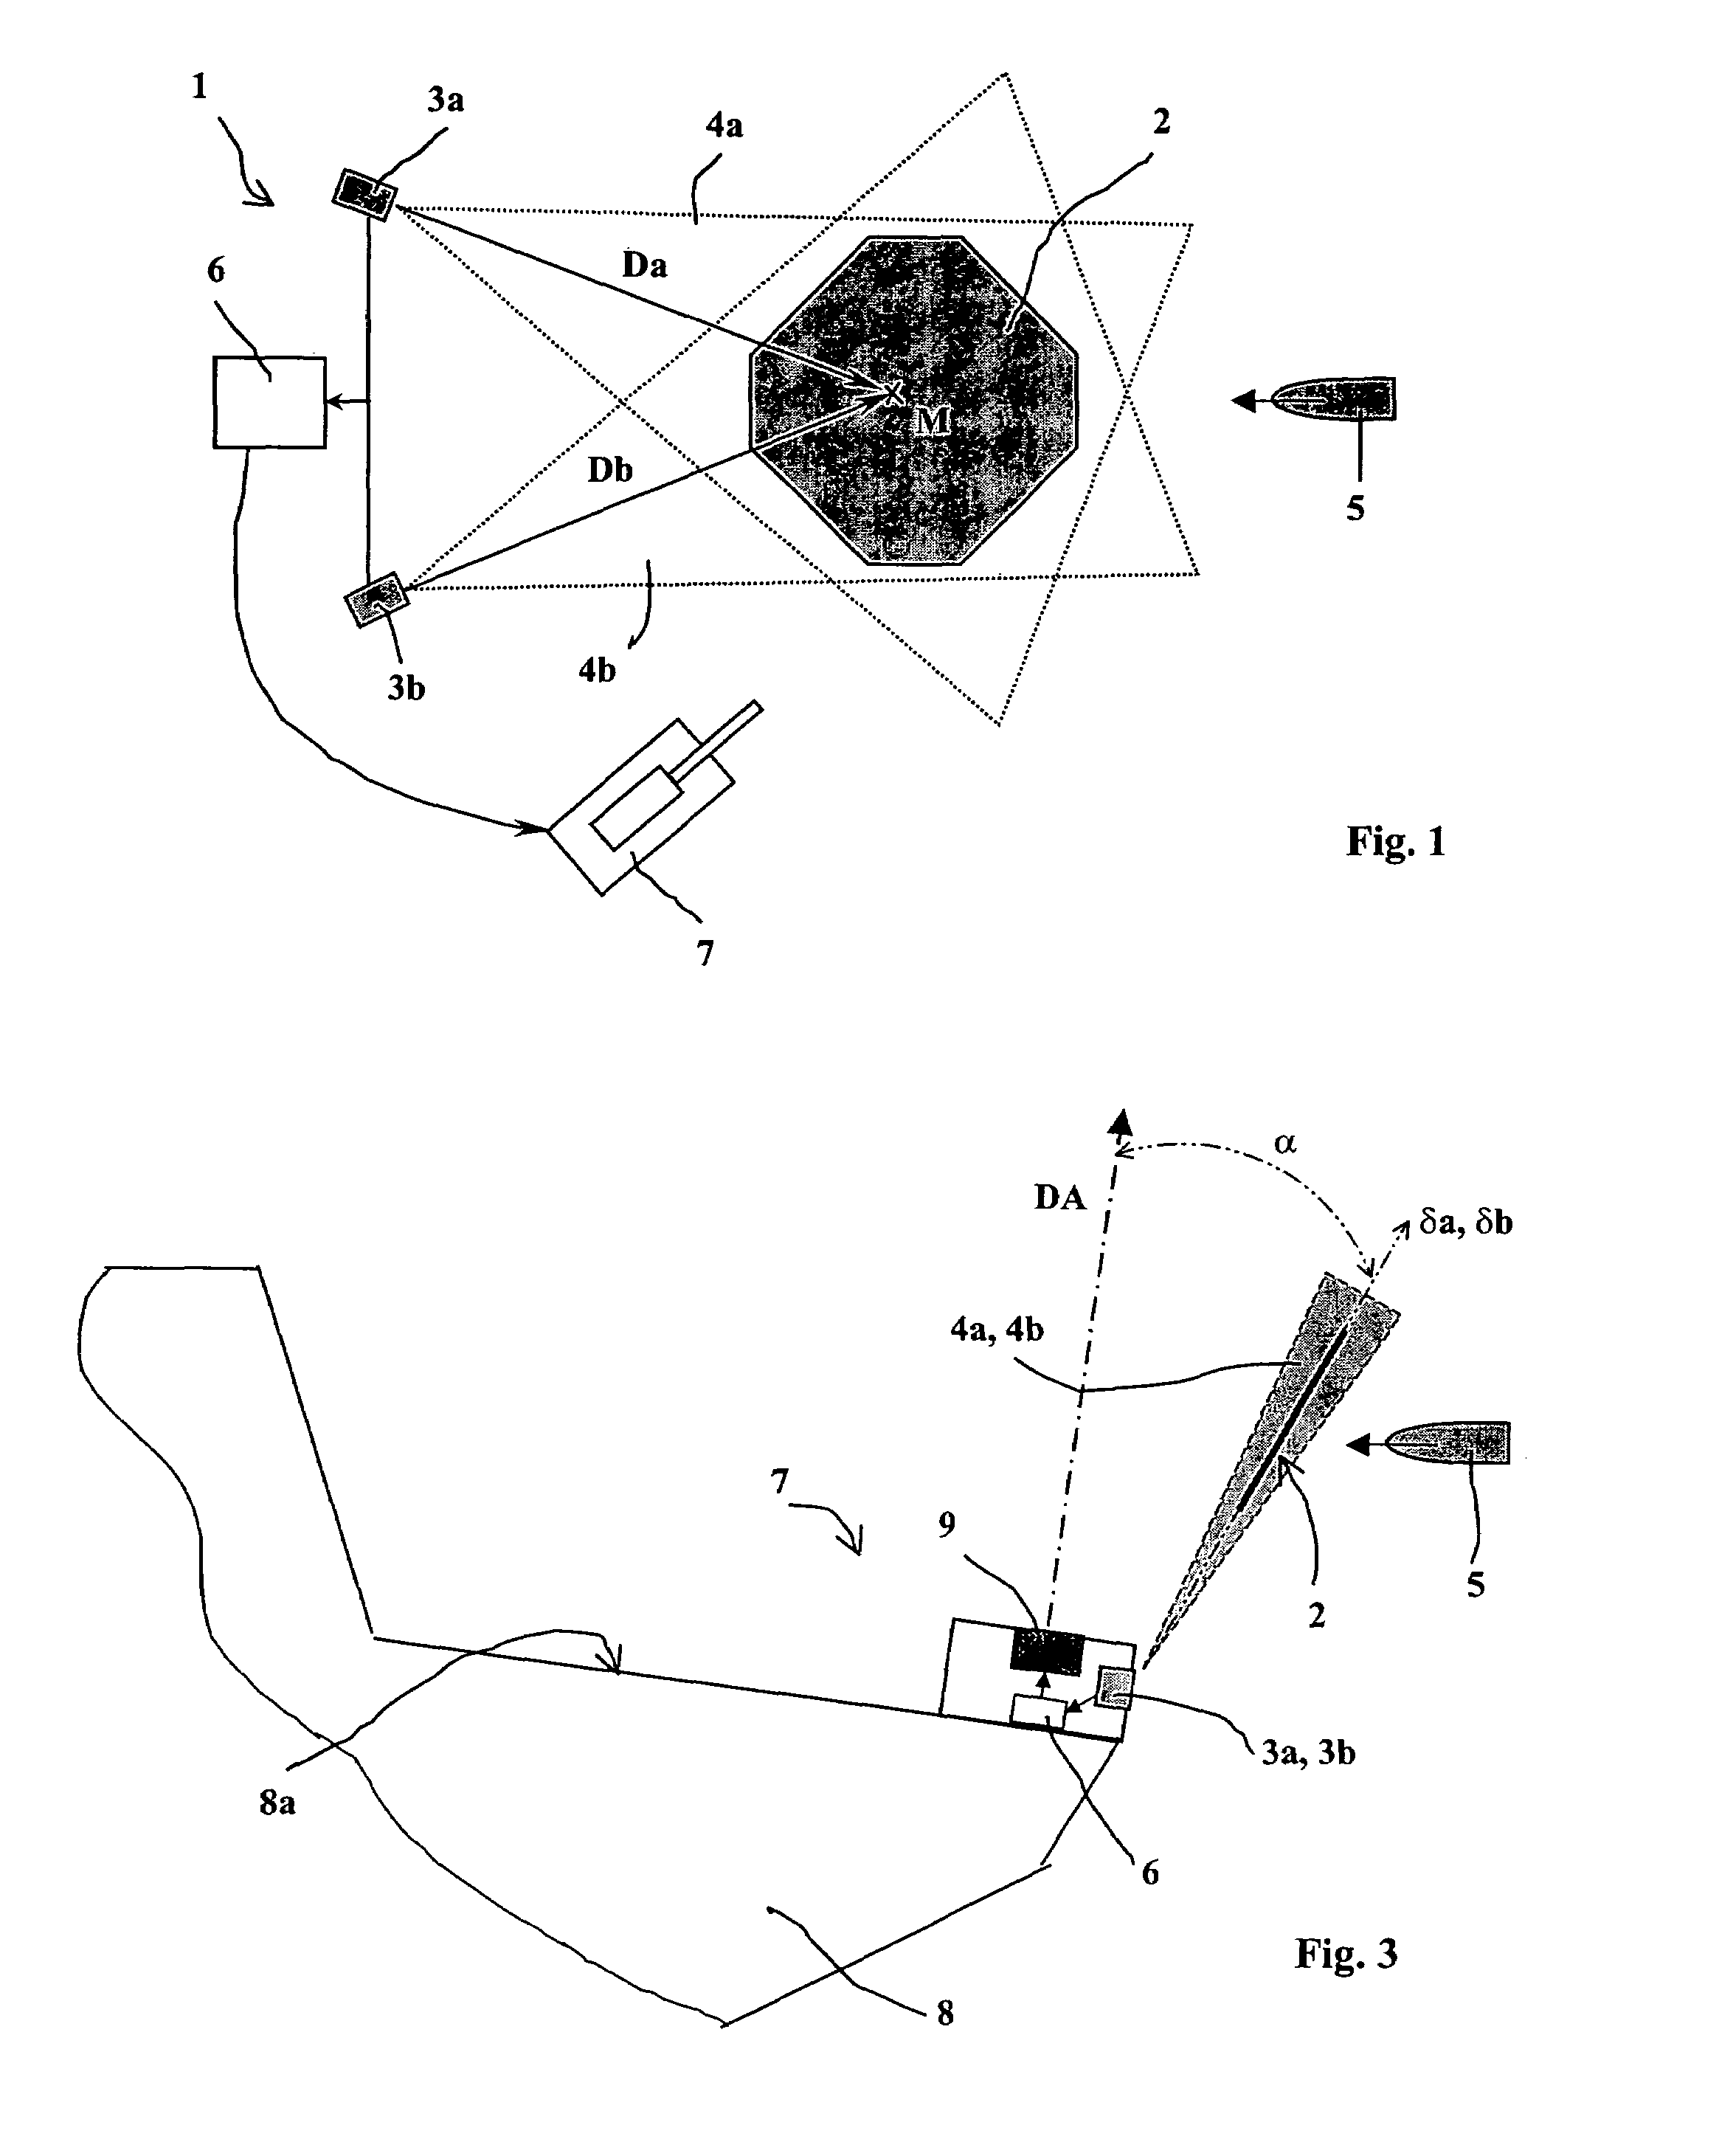 Processes and devices enabling the entry of a target into a zone to be detected